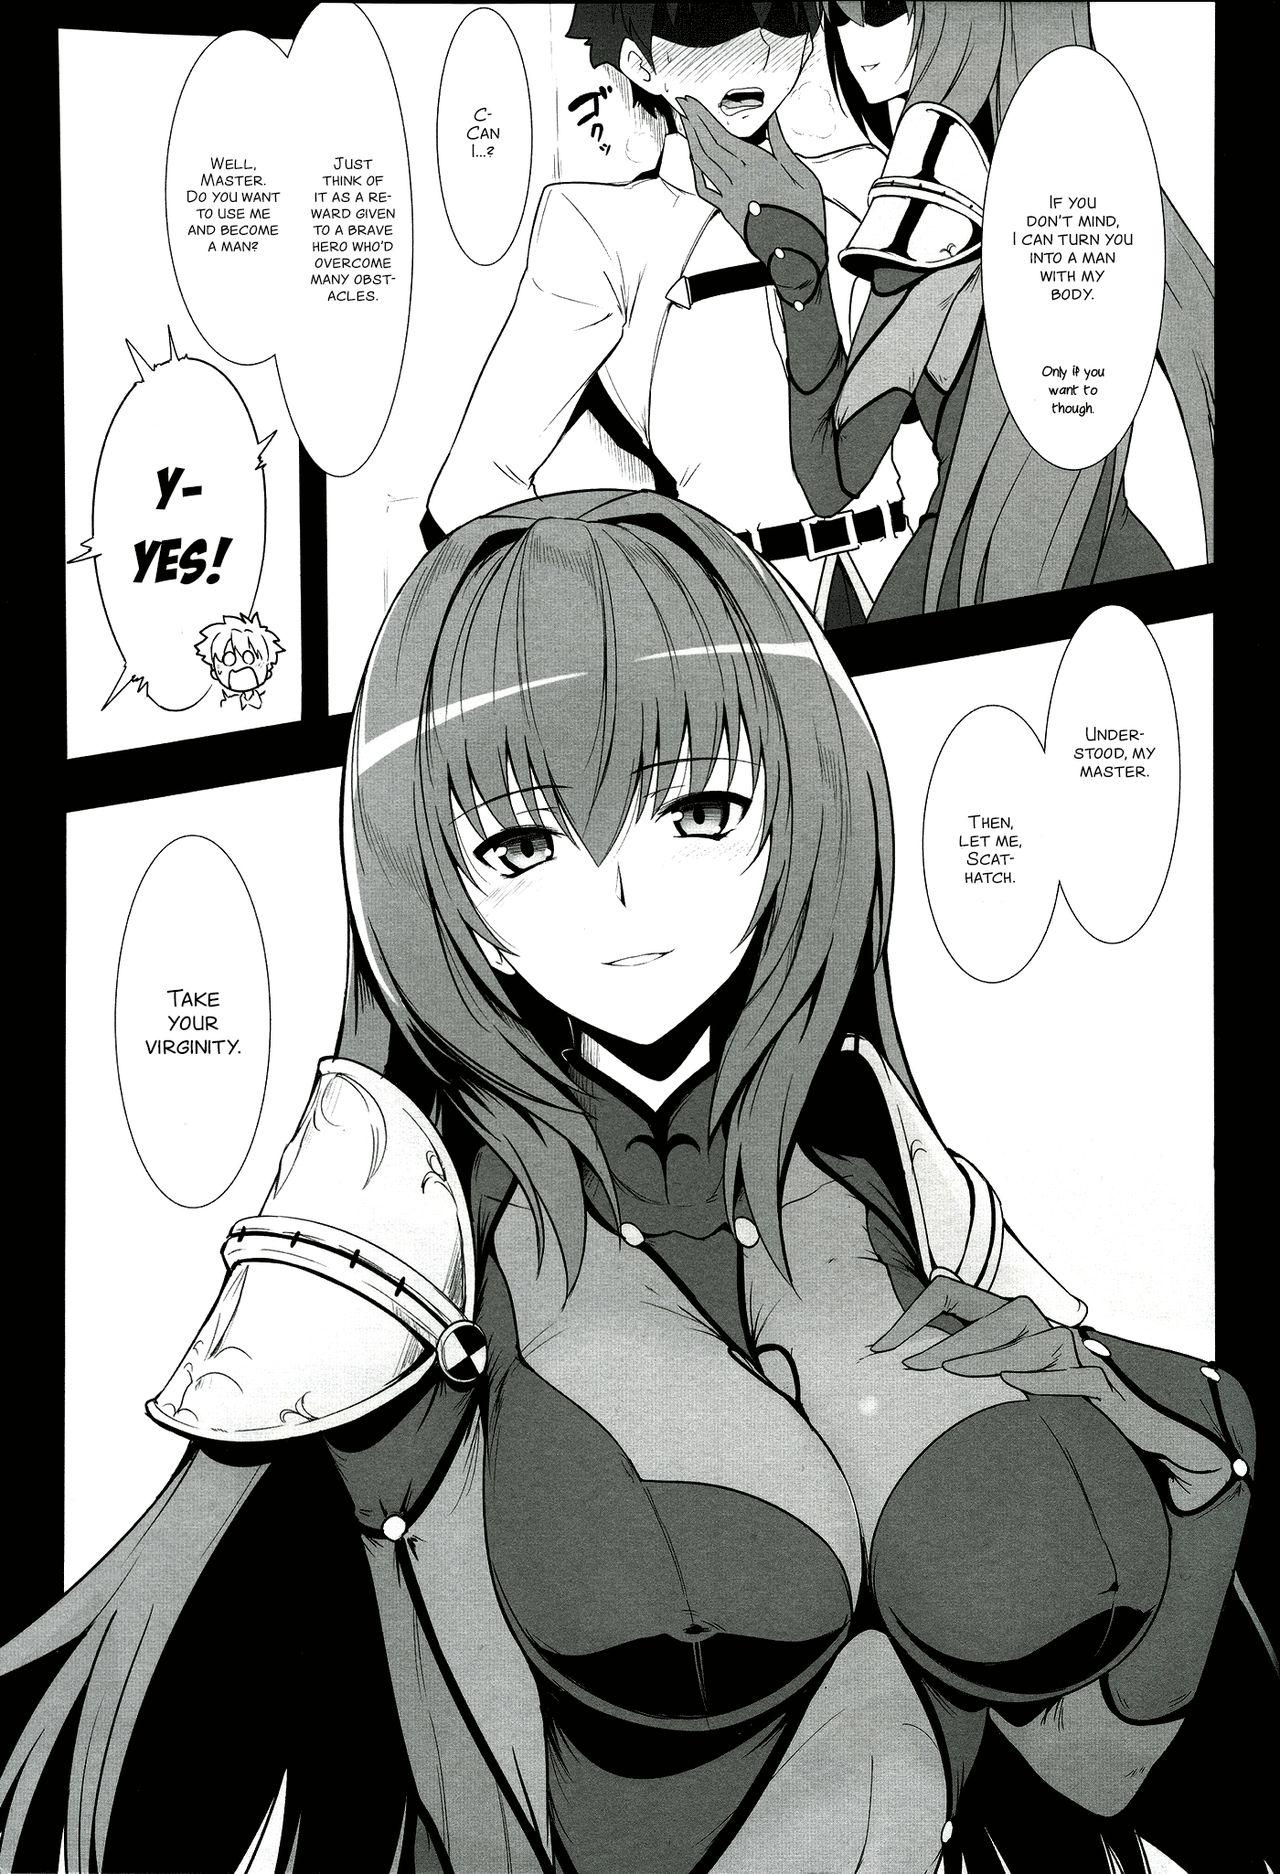 Baile AH! MY MISTRESS! - Fate grand order Jerkoff - Page 6